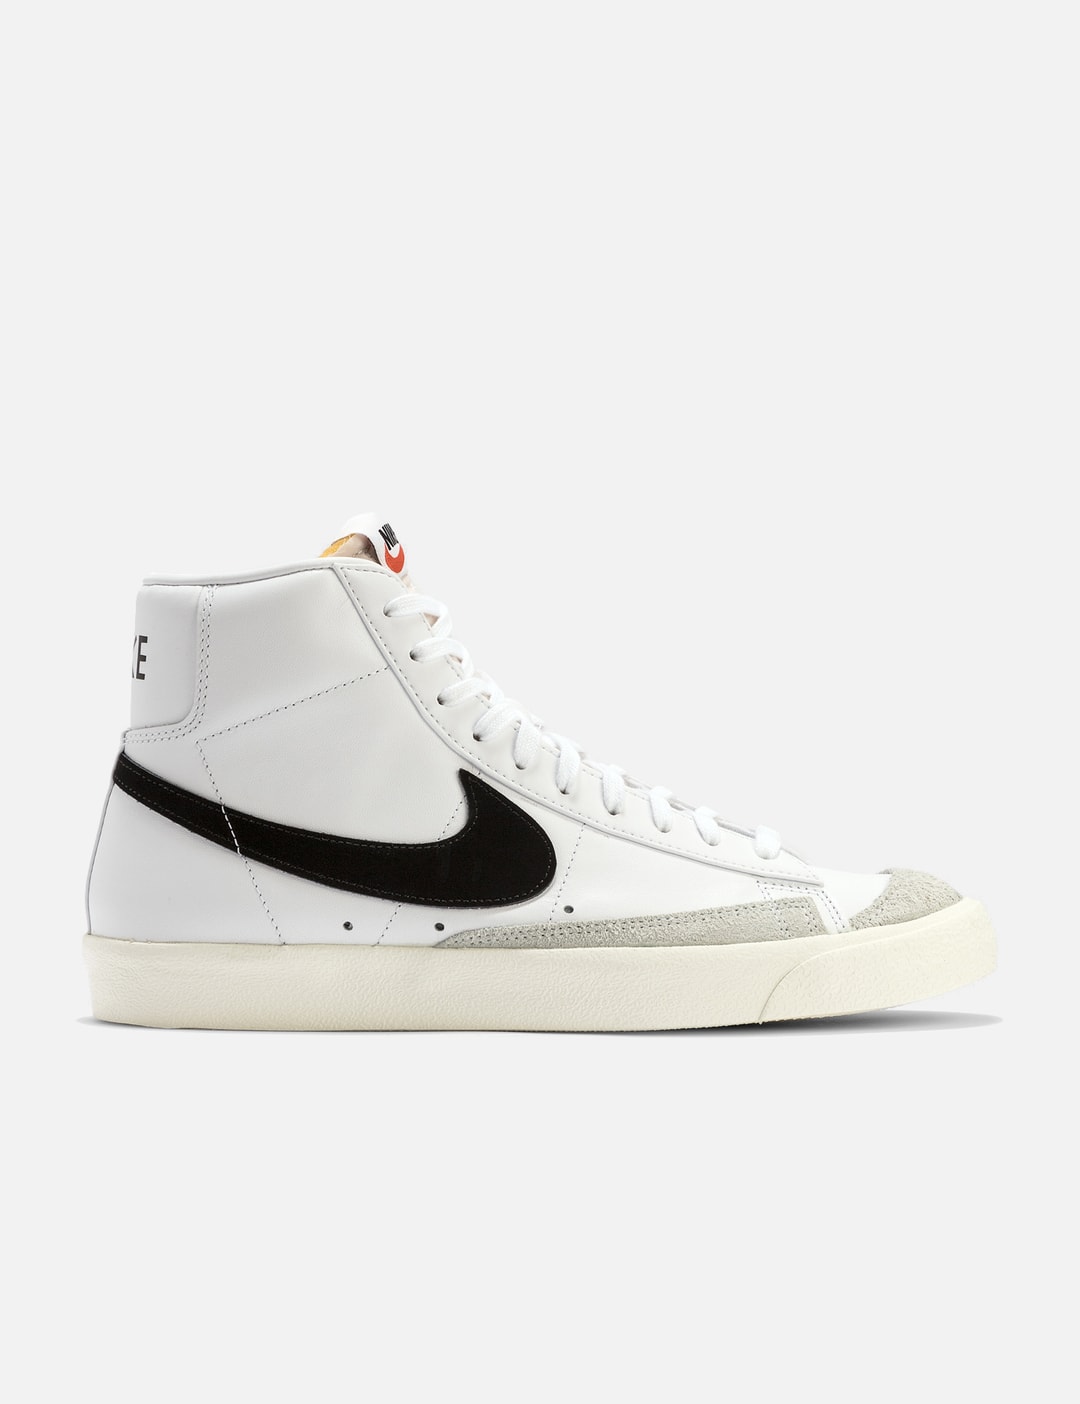 Nike - Nike Blazer Mid '77 Vintage | HBX - Globally Curated Fashion and ...